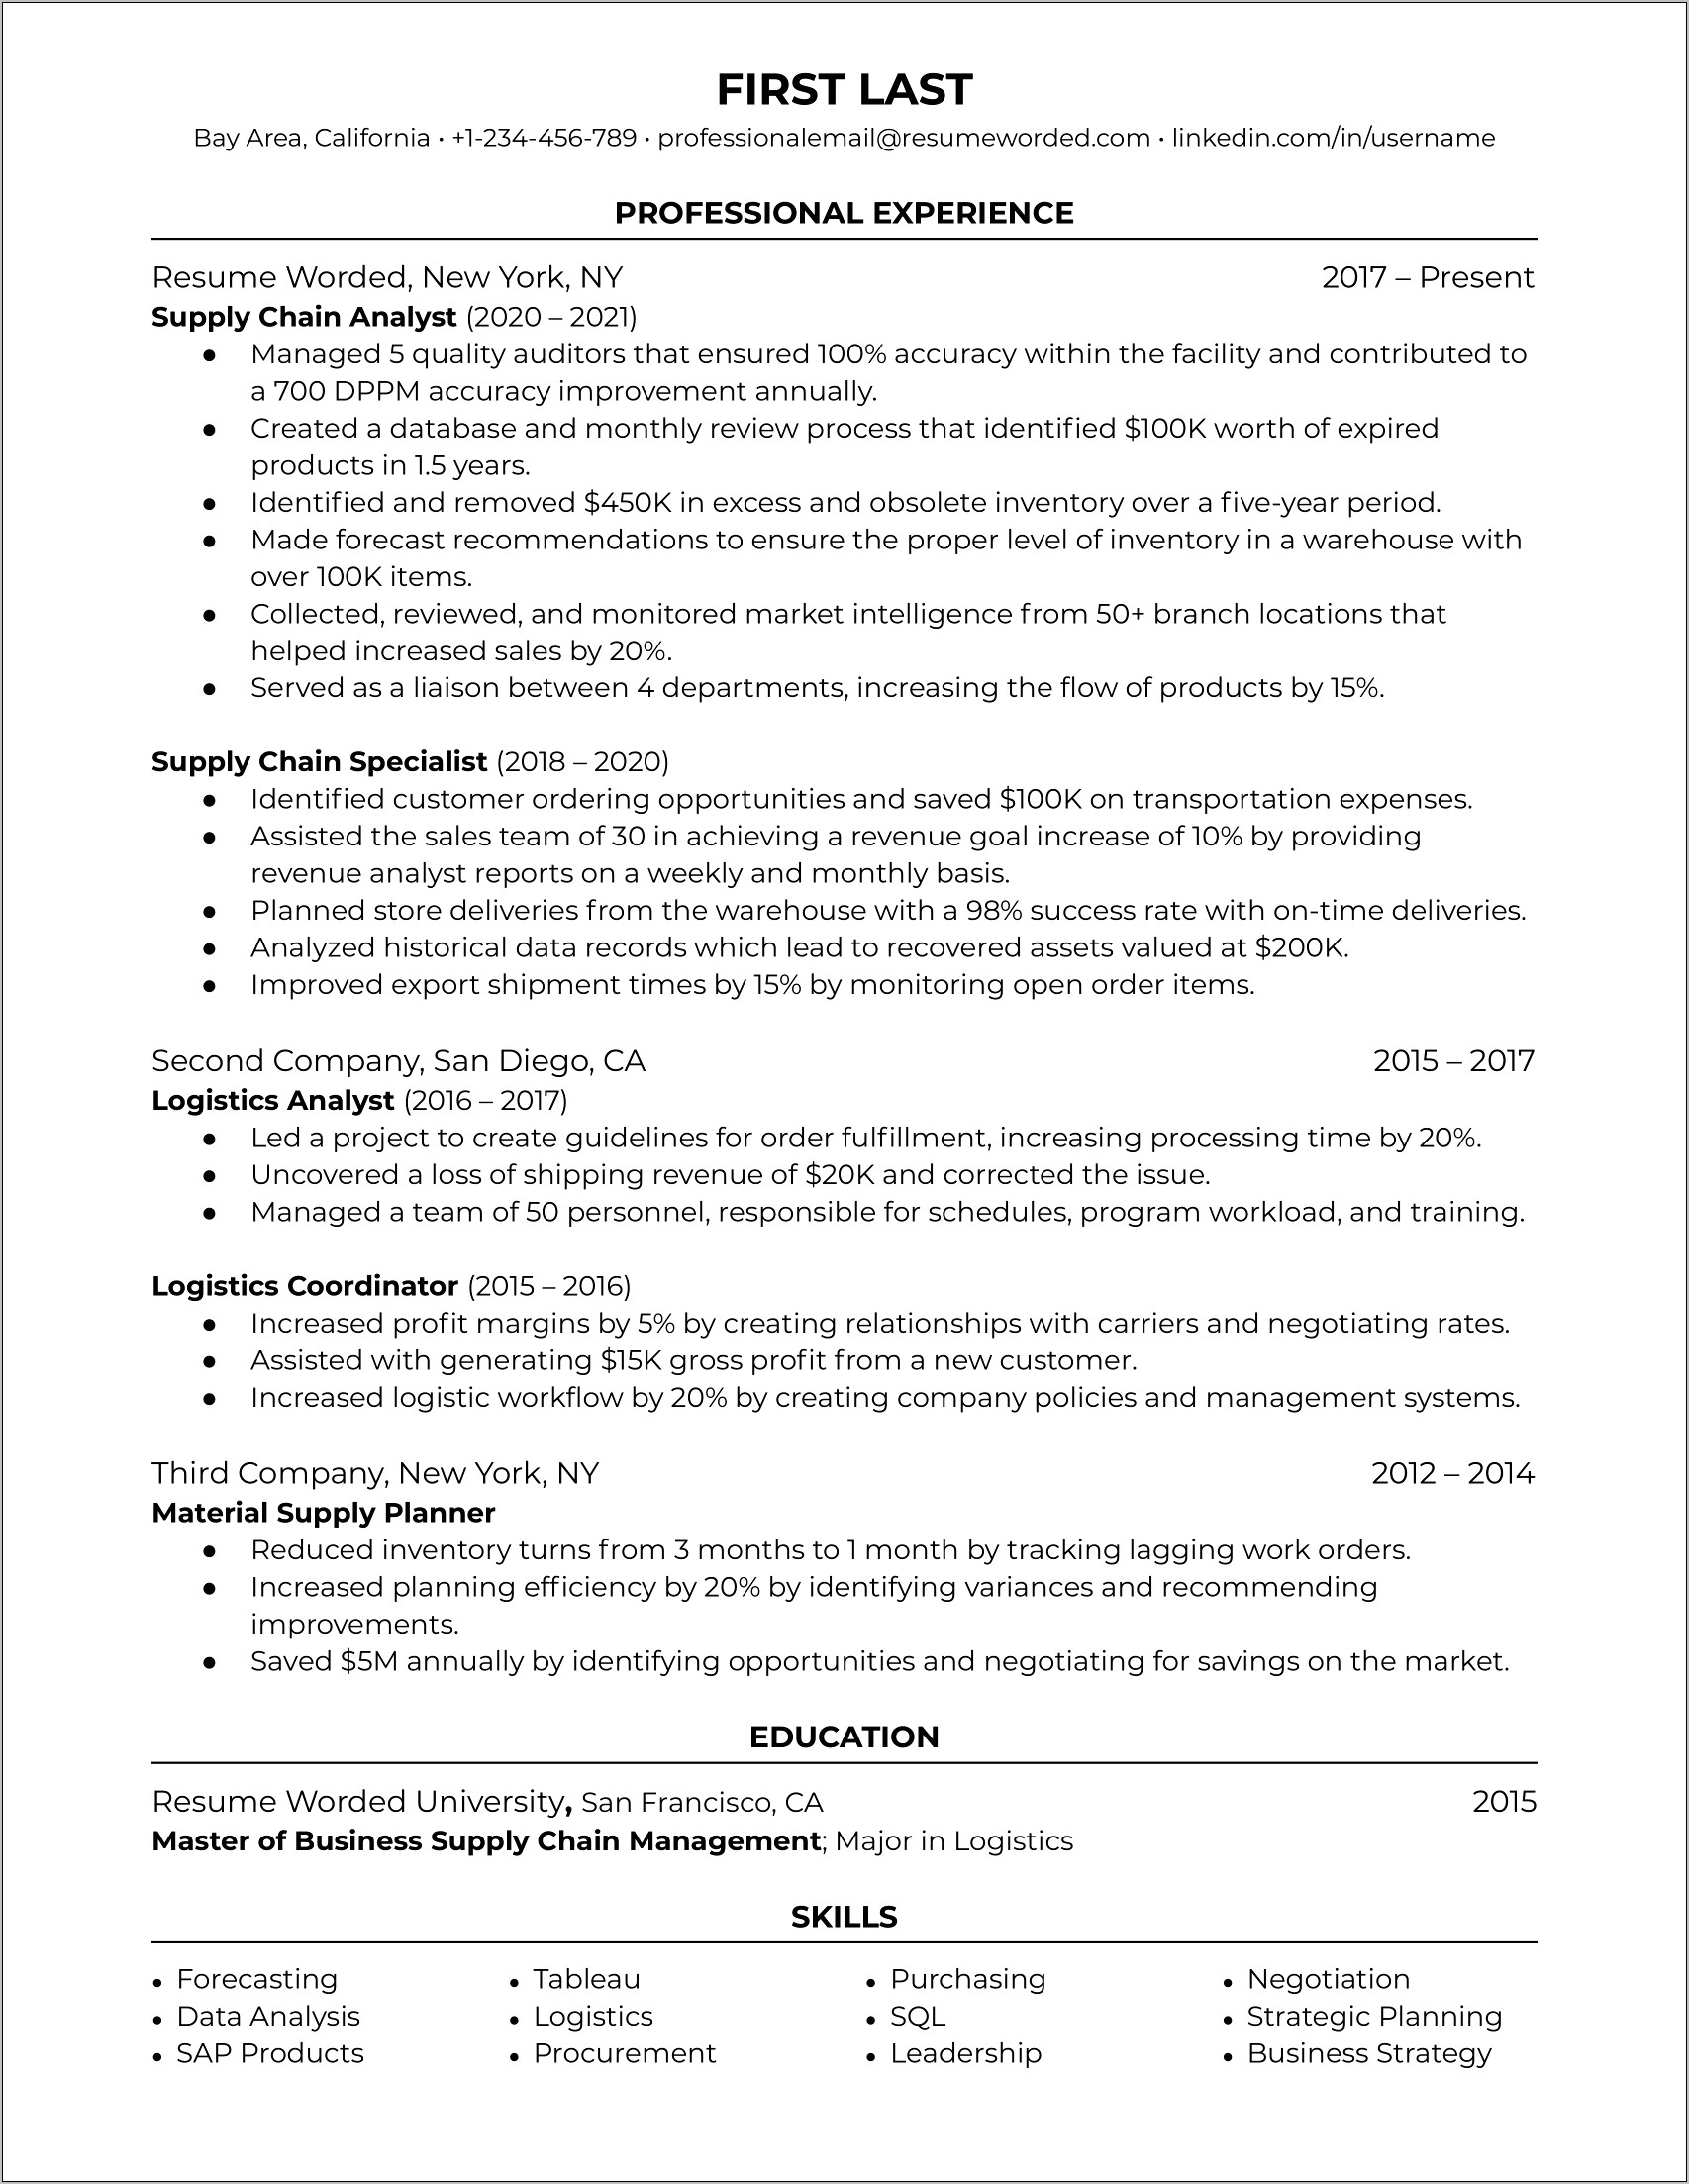 Resume Format For Logistics And Supply Chain Management